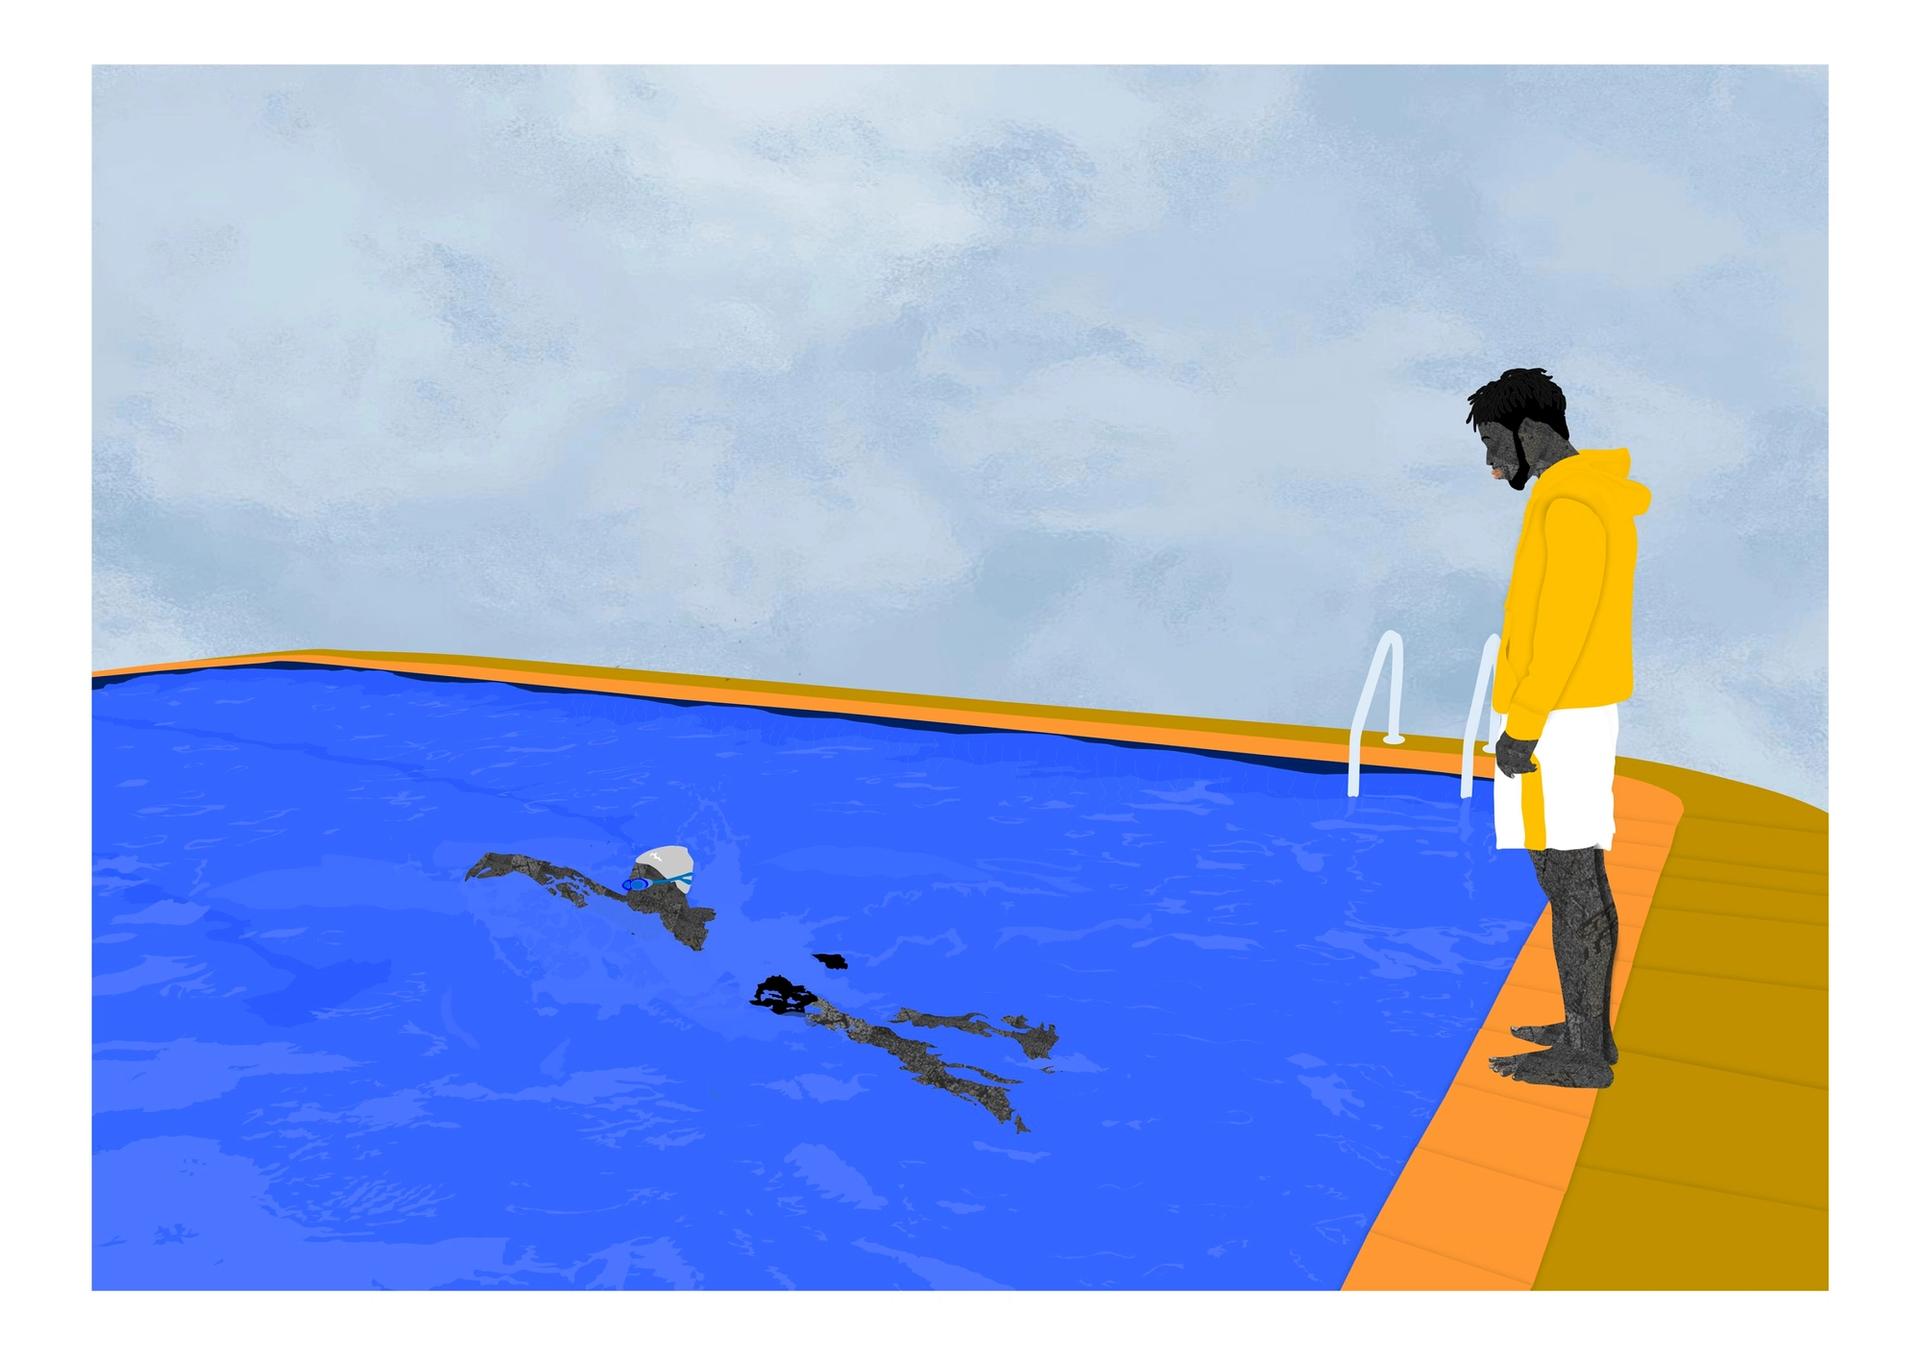 Osinachi's Pool Day II (2021), a digital collage on Microsoft Word

Courtesy of the artist and Art X Lagos